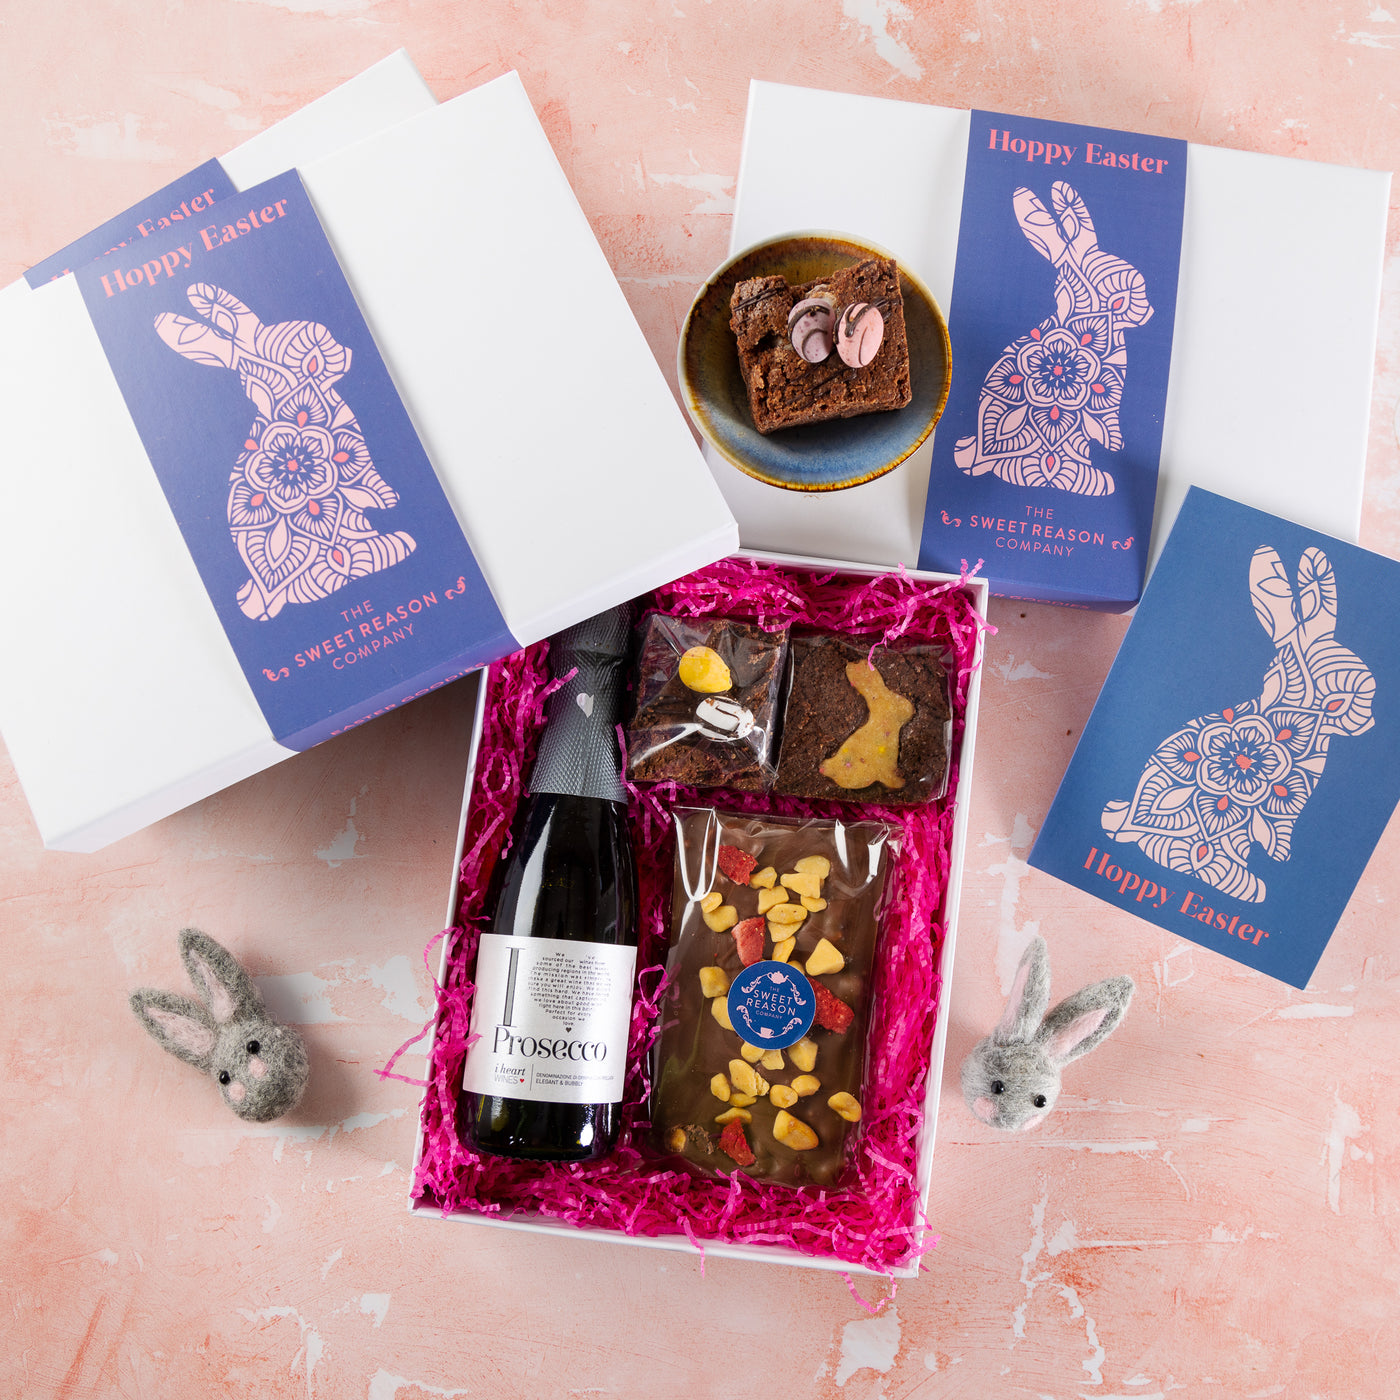 'Easter Bunny' Chocolate Slab, Brownies and Prosecco